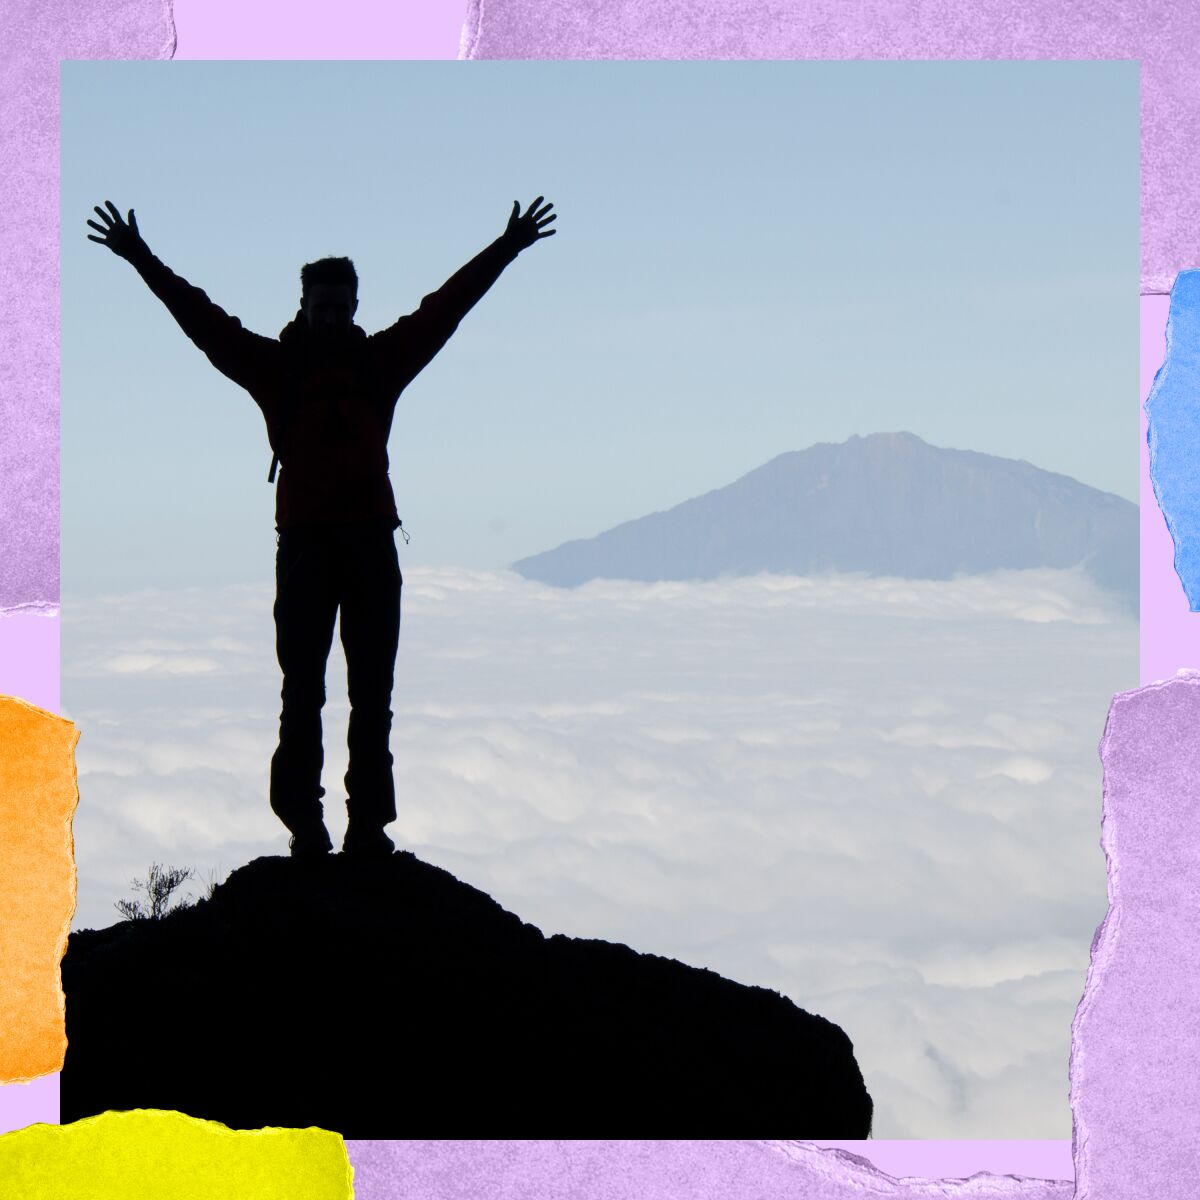 A man stands on top of a mountain, arms outstretched above his head, overlooking a bank of clouds.